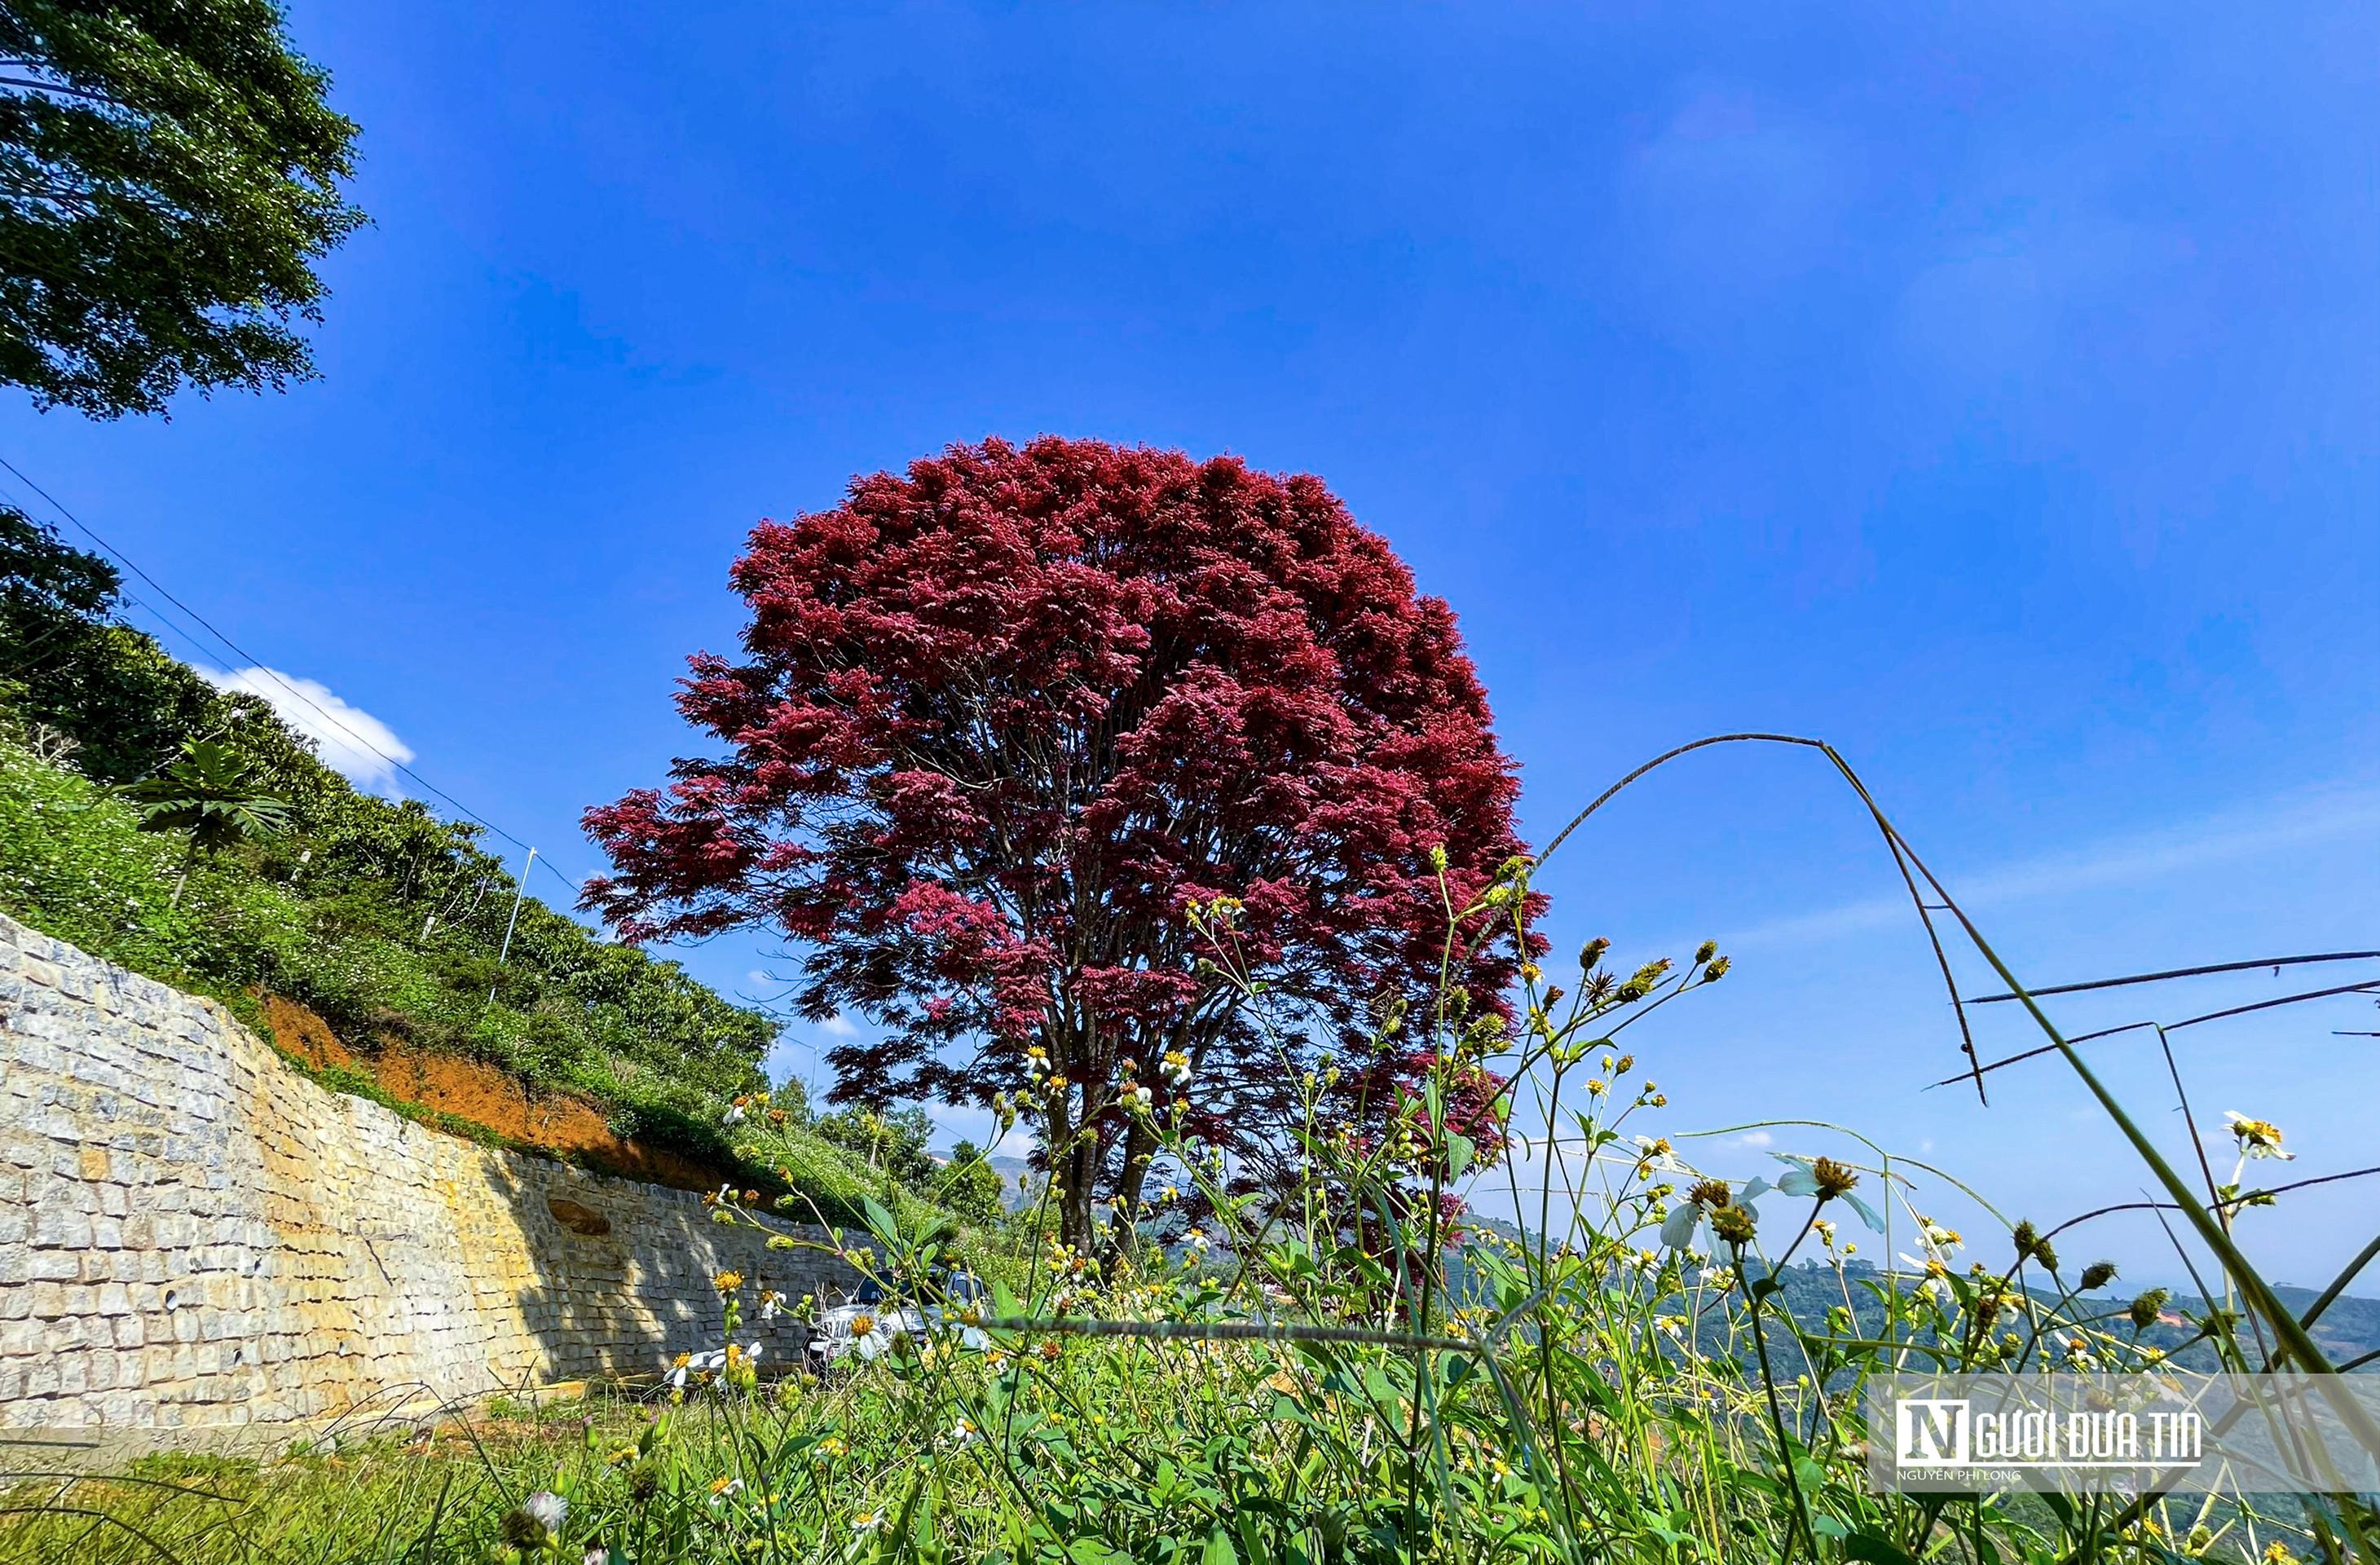 Delighted with the image of the red leaf brooch blooming on the Lam Dong plateau - 4